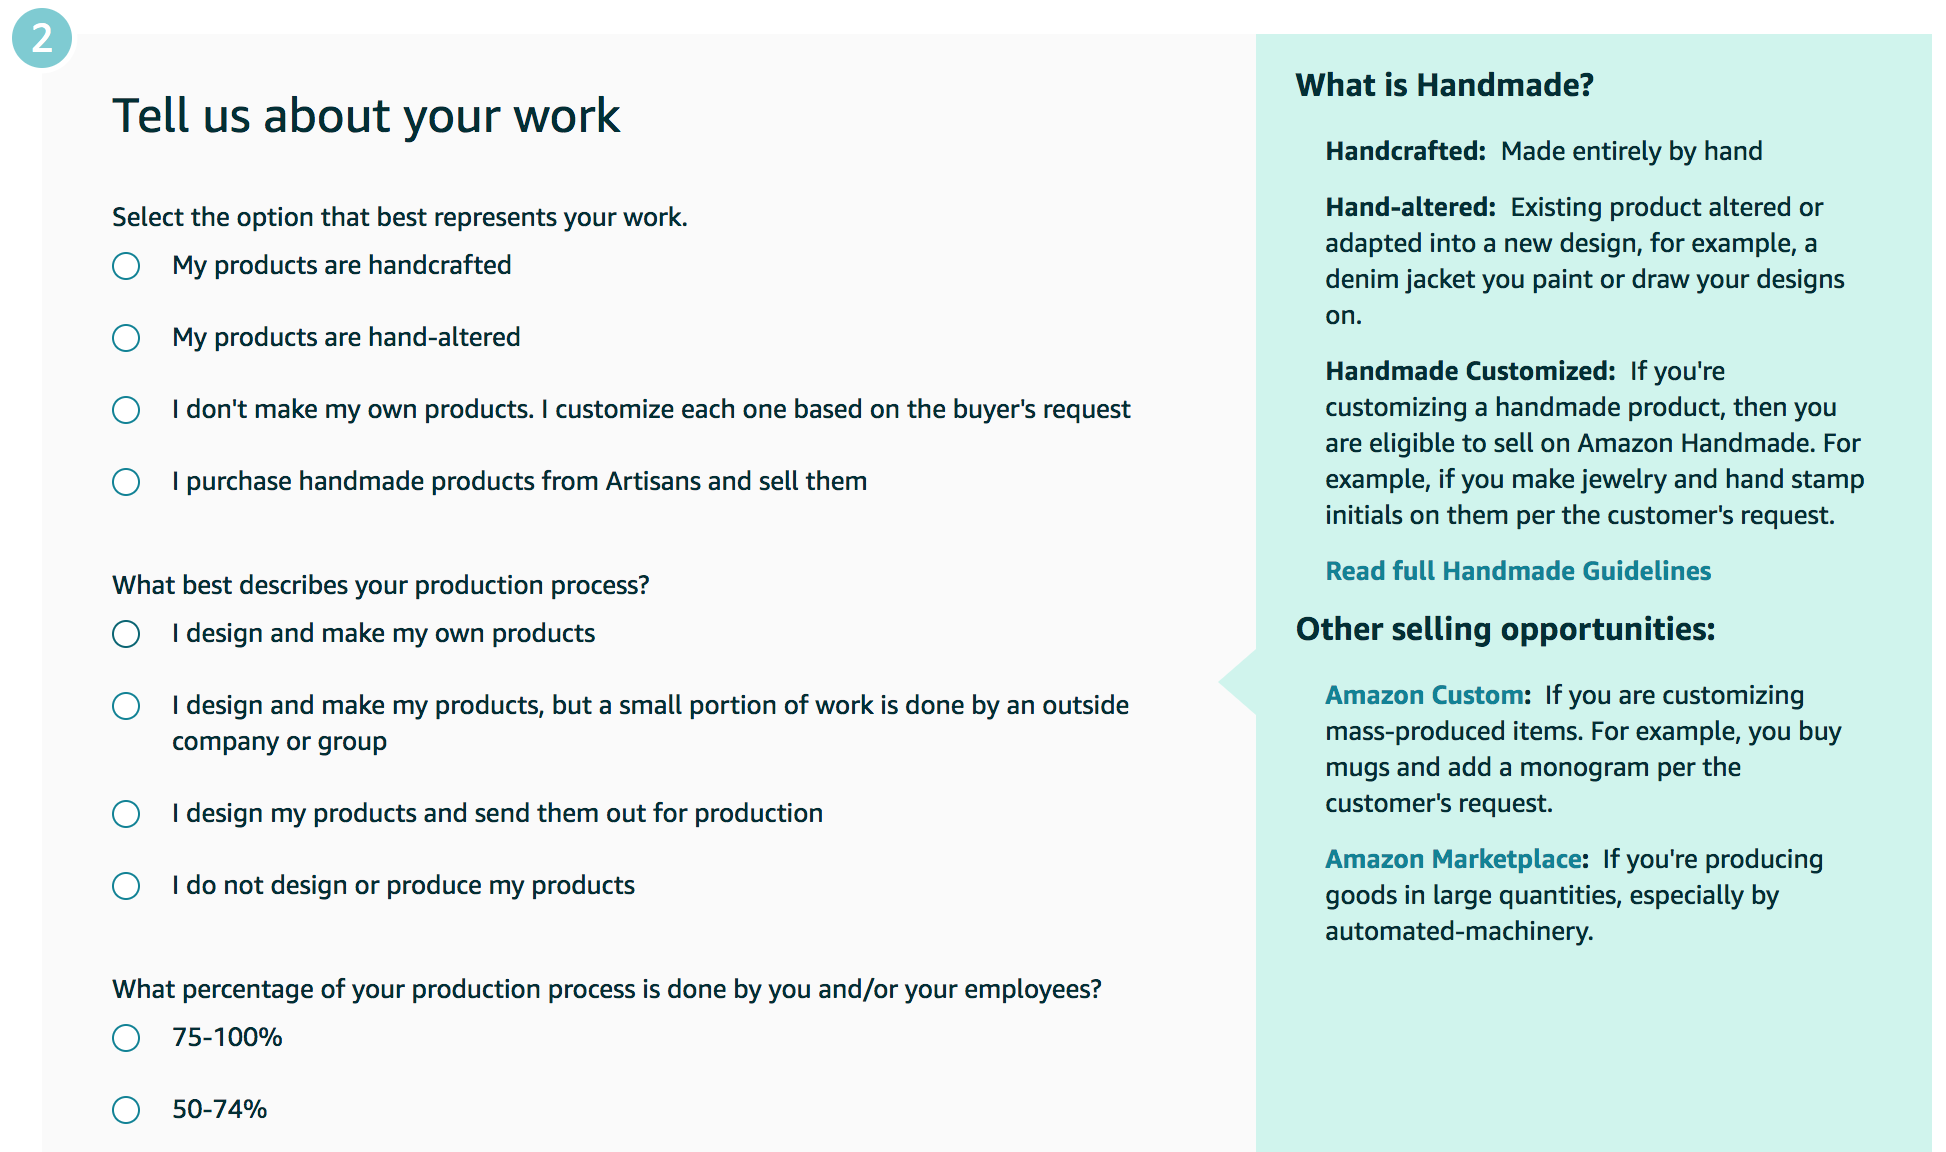 Amazon Handmade Application Process - About Your Work